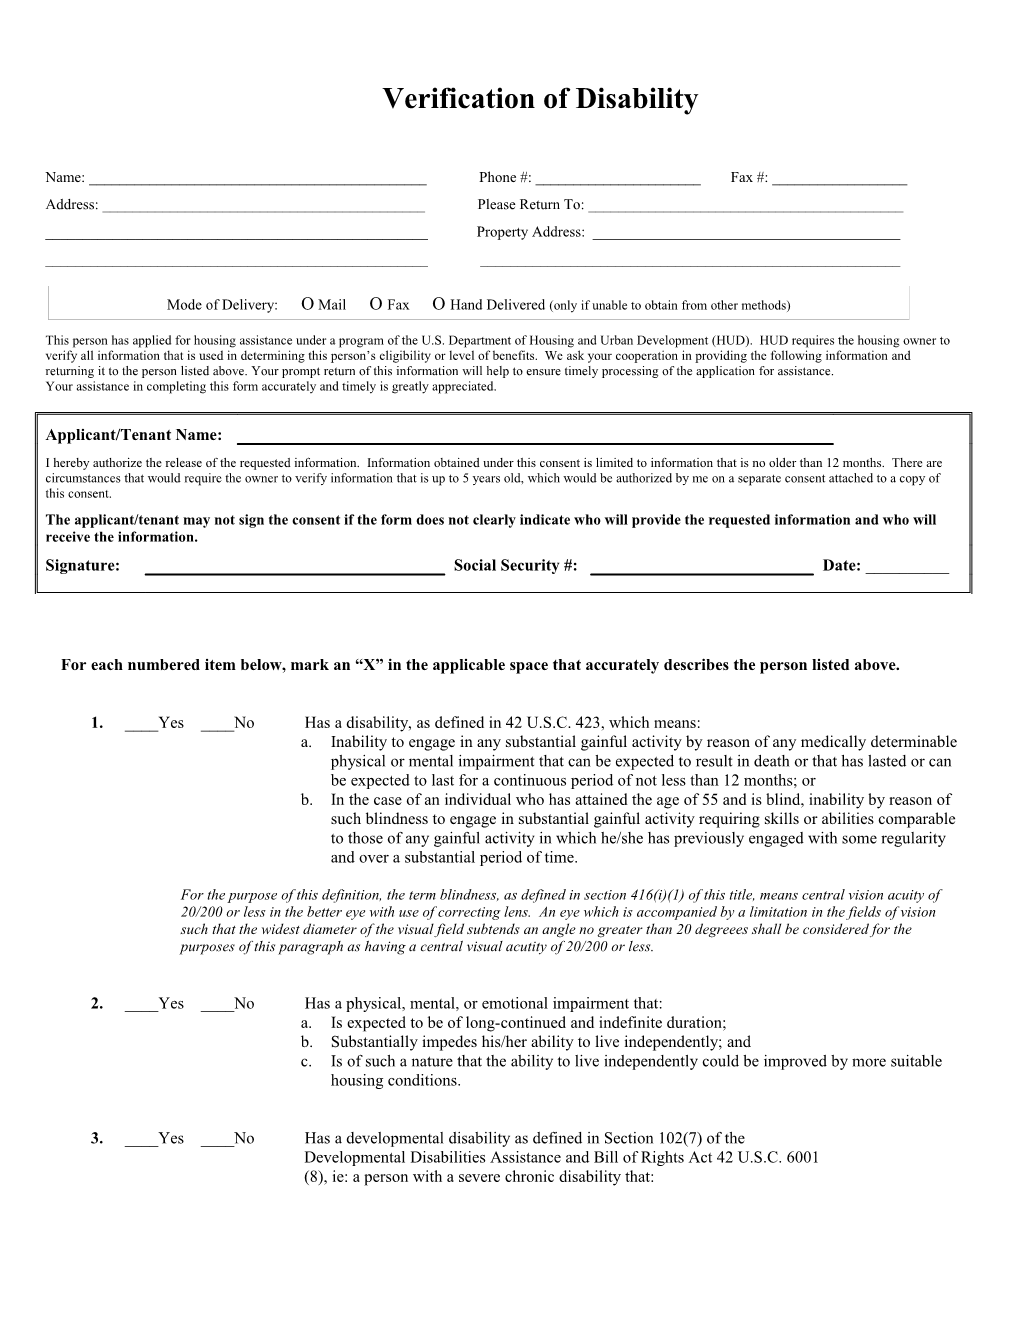 Your Assistance in Completing This Form Accurately and Timely Is Greatly Appreciated